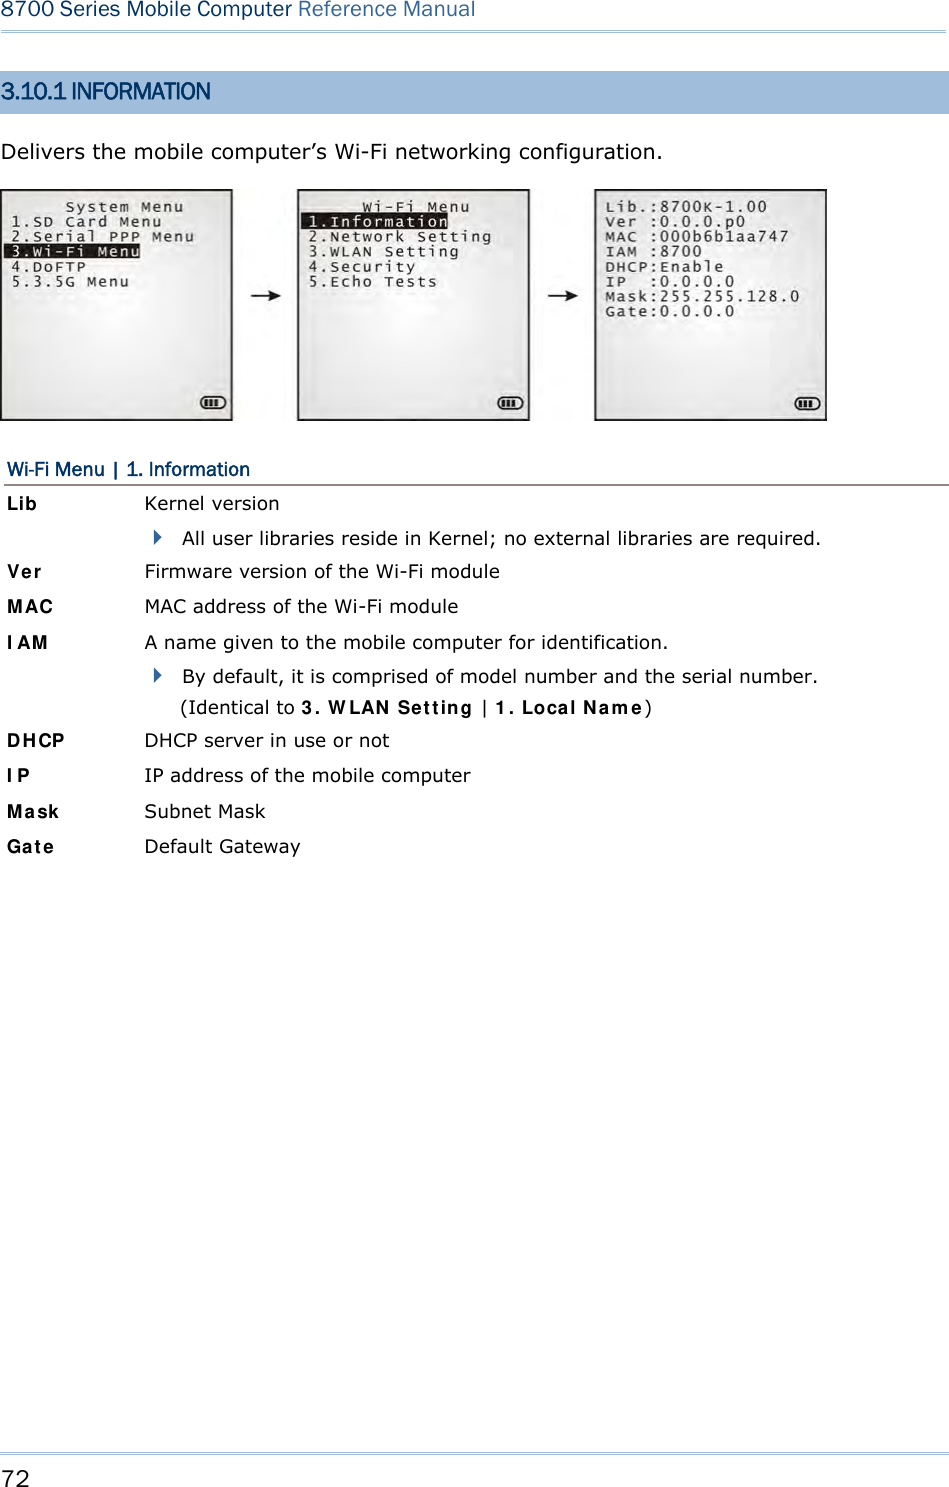 72  8700 Series Mobile Computer Reference Manual  3.10.1 INFORMATION Delivers the mobile computer’s Wi-Fi networking configuration.  Wi-Fi Menu | 1. Information Lib Kernel version  All user libraries reside in Kernel; no external libraries are required. Ve r  Firmware version of the Wi-Fi module MAC  MAC address of the Wi-Fi module I AM  A name given to the mobile computer for identification.  By default, it is comprised of model number and the serial number. (Identical to 3 . W LAN  Se t t ing | 1 . Local N a m e ) DHCP  DHCP server in use or not I P  IP address of the mobile computer Mask  Subnet Mask Gat e  Default Gateway            